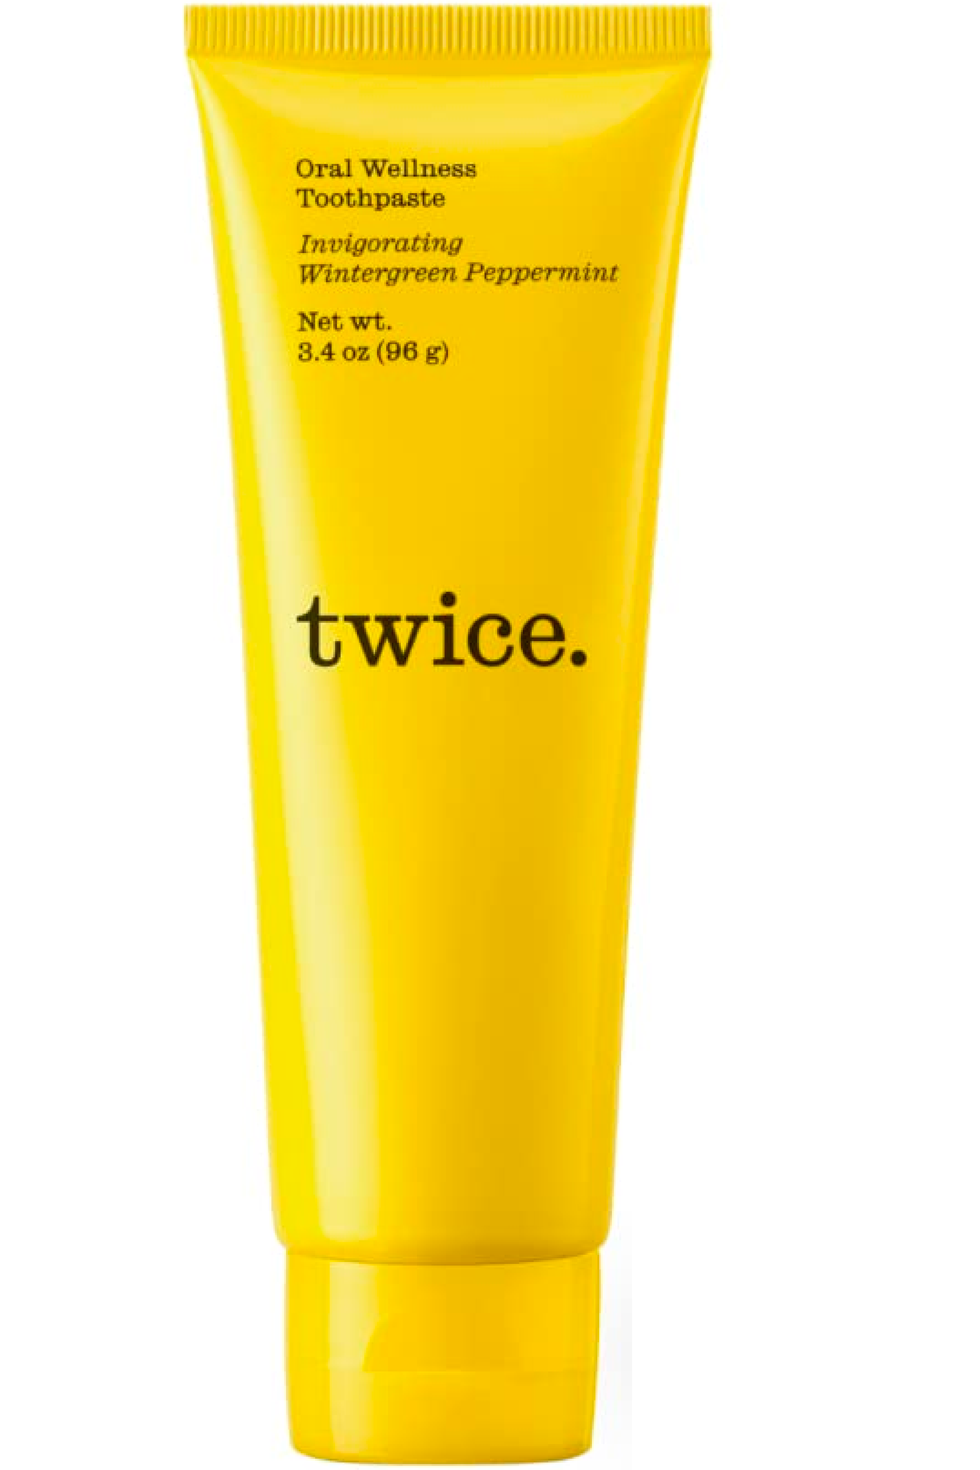 Twice Oral Wellness Toothpaste